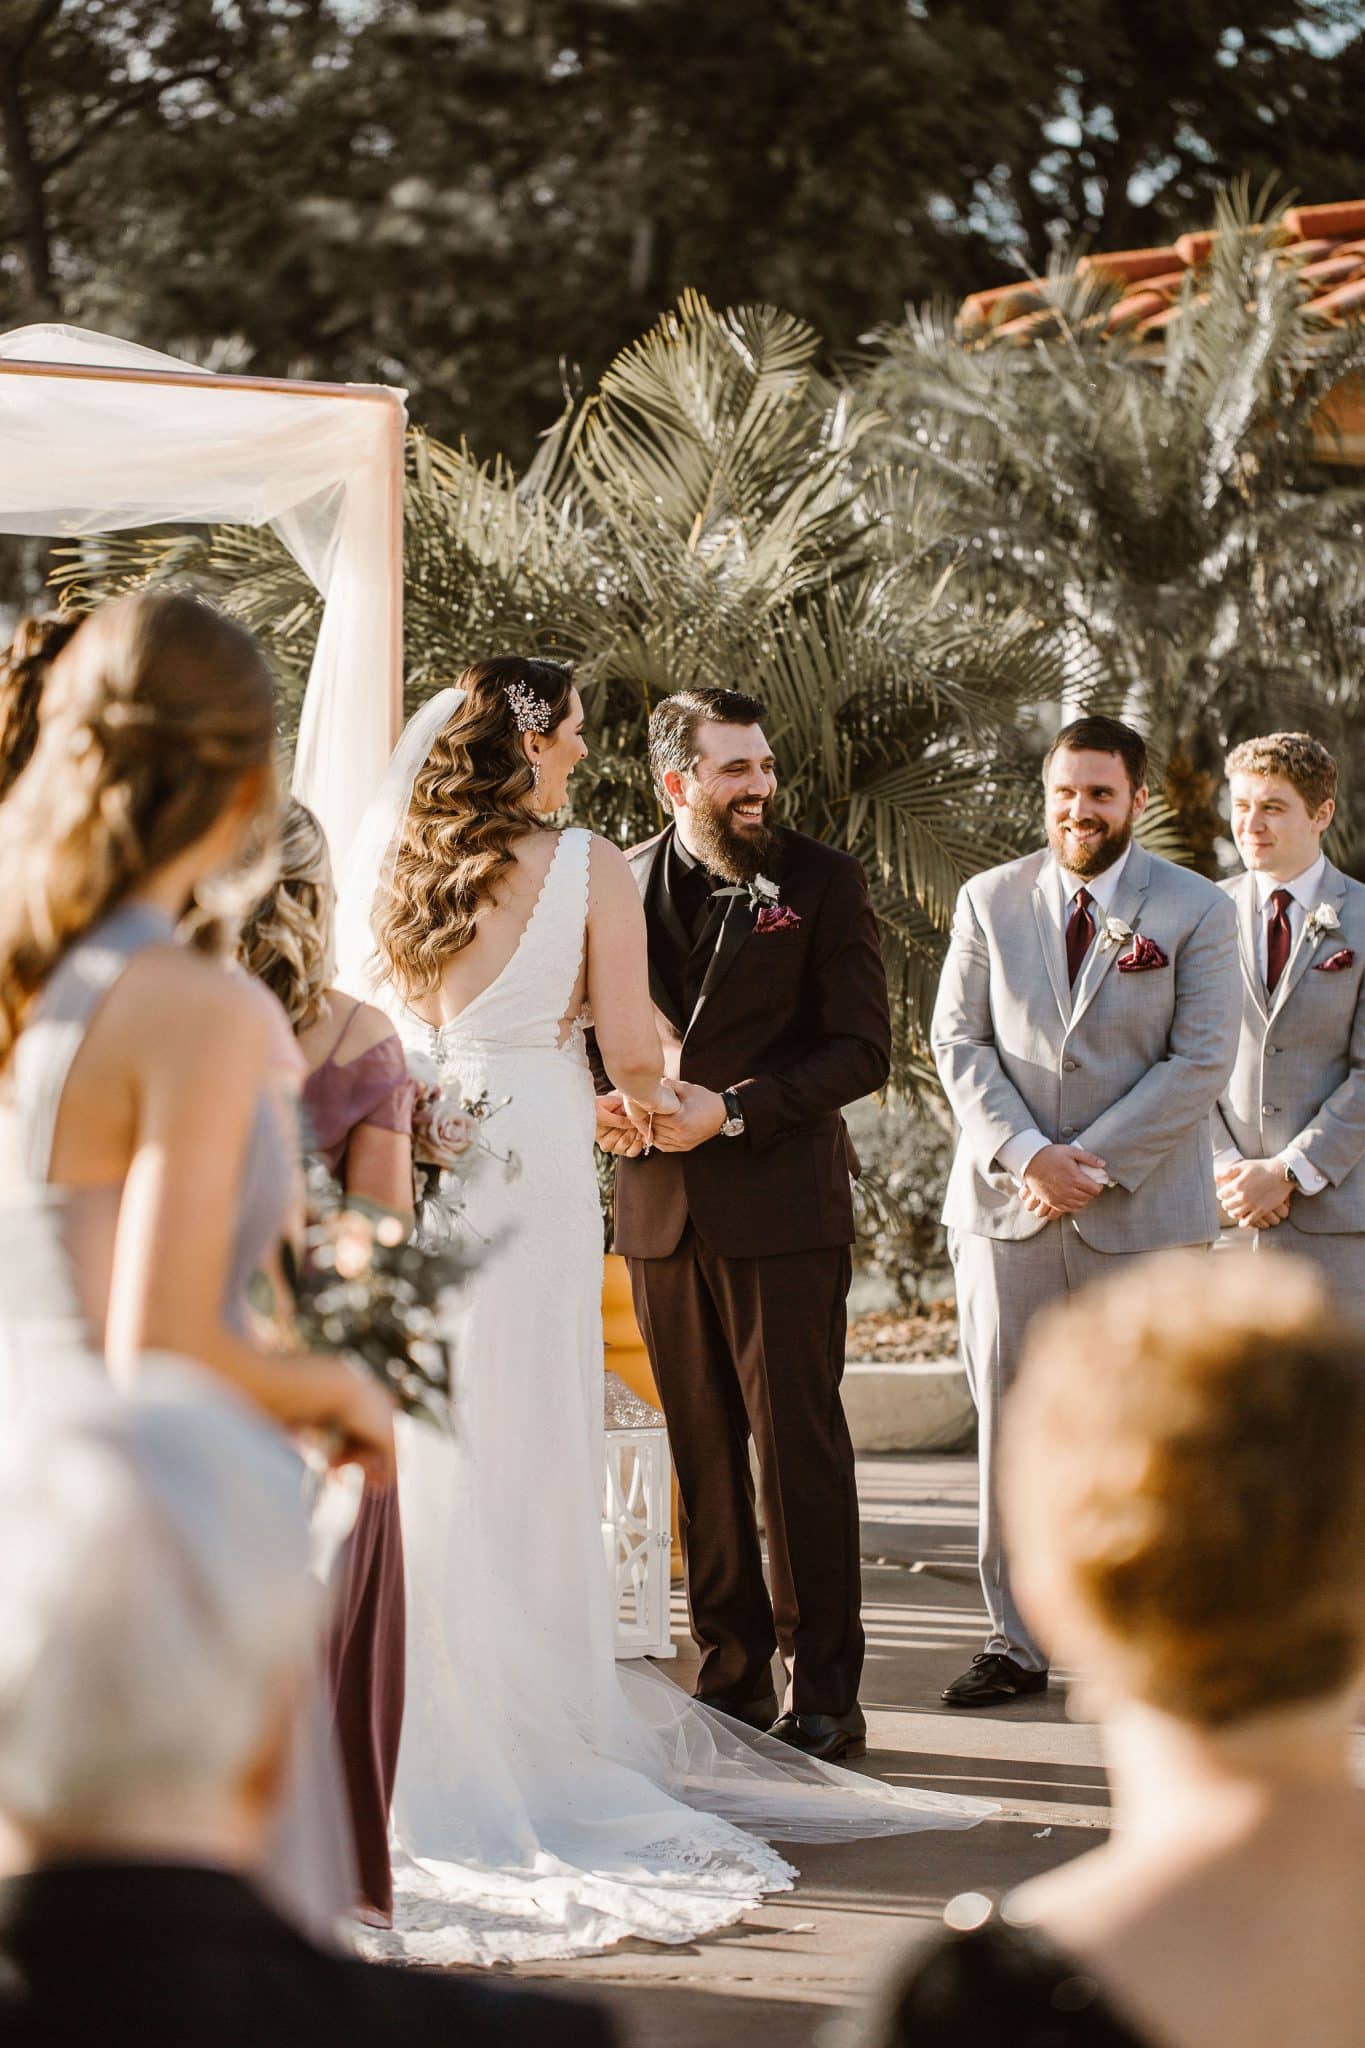 Wedding ceremony at a Spanish style wedding venue in Florida